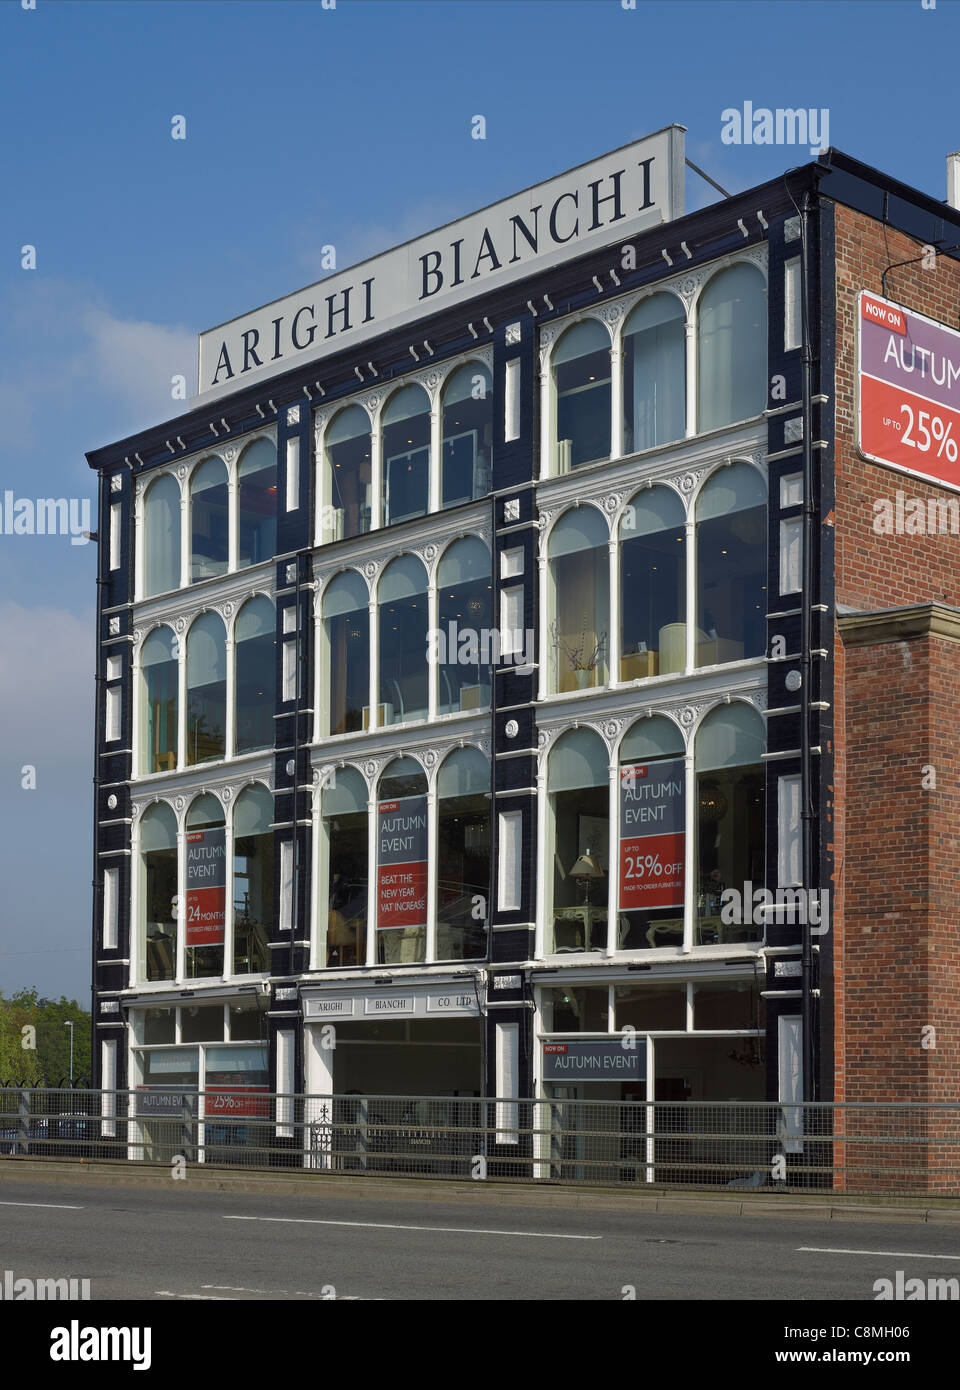 ARIGHI BIANCHI's store, Macclesfield, Cheshire Banque D'Images